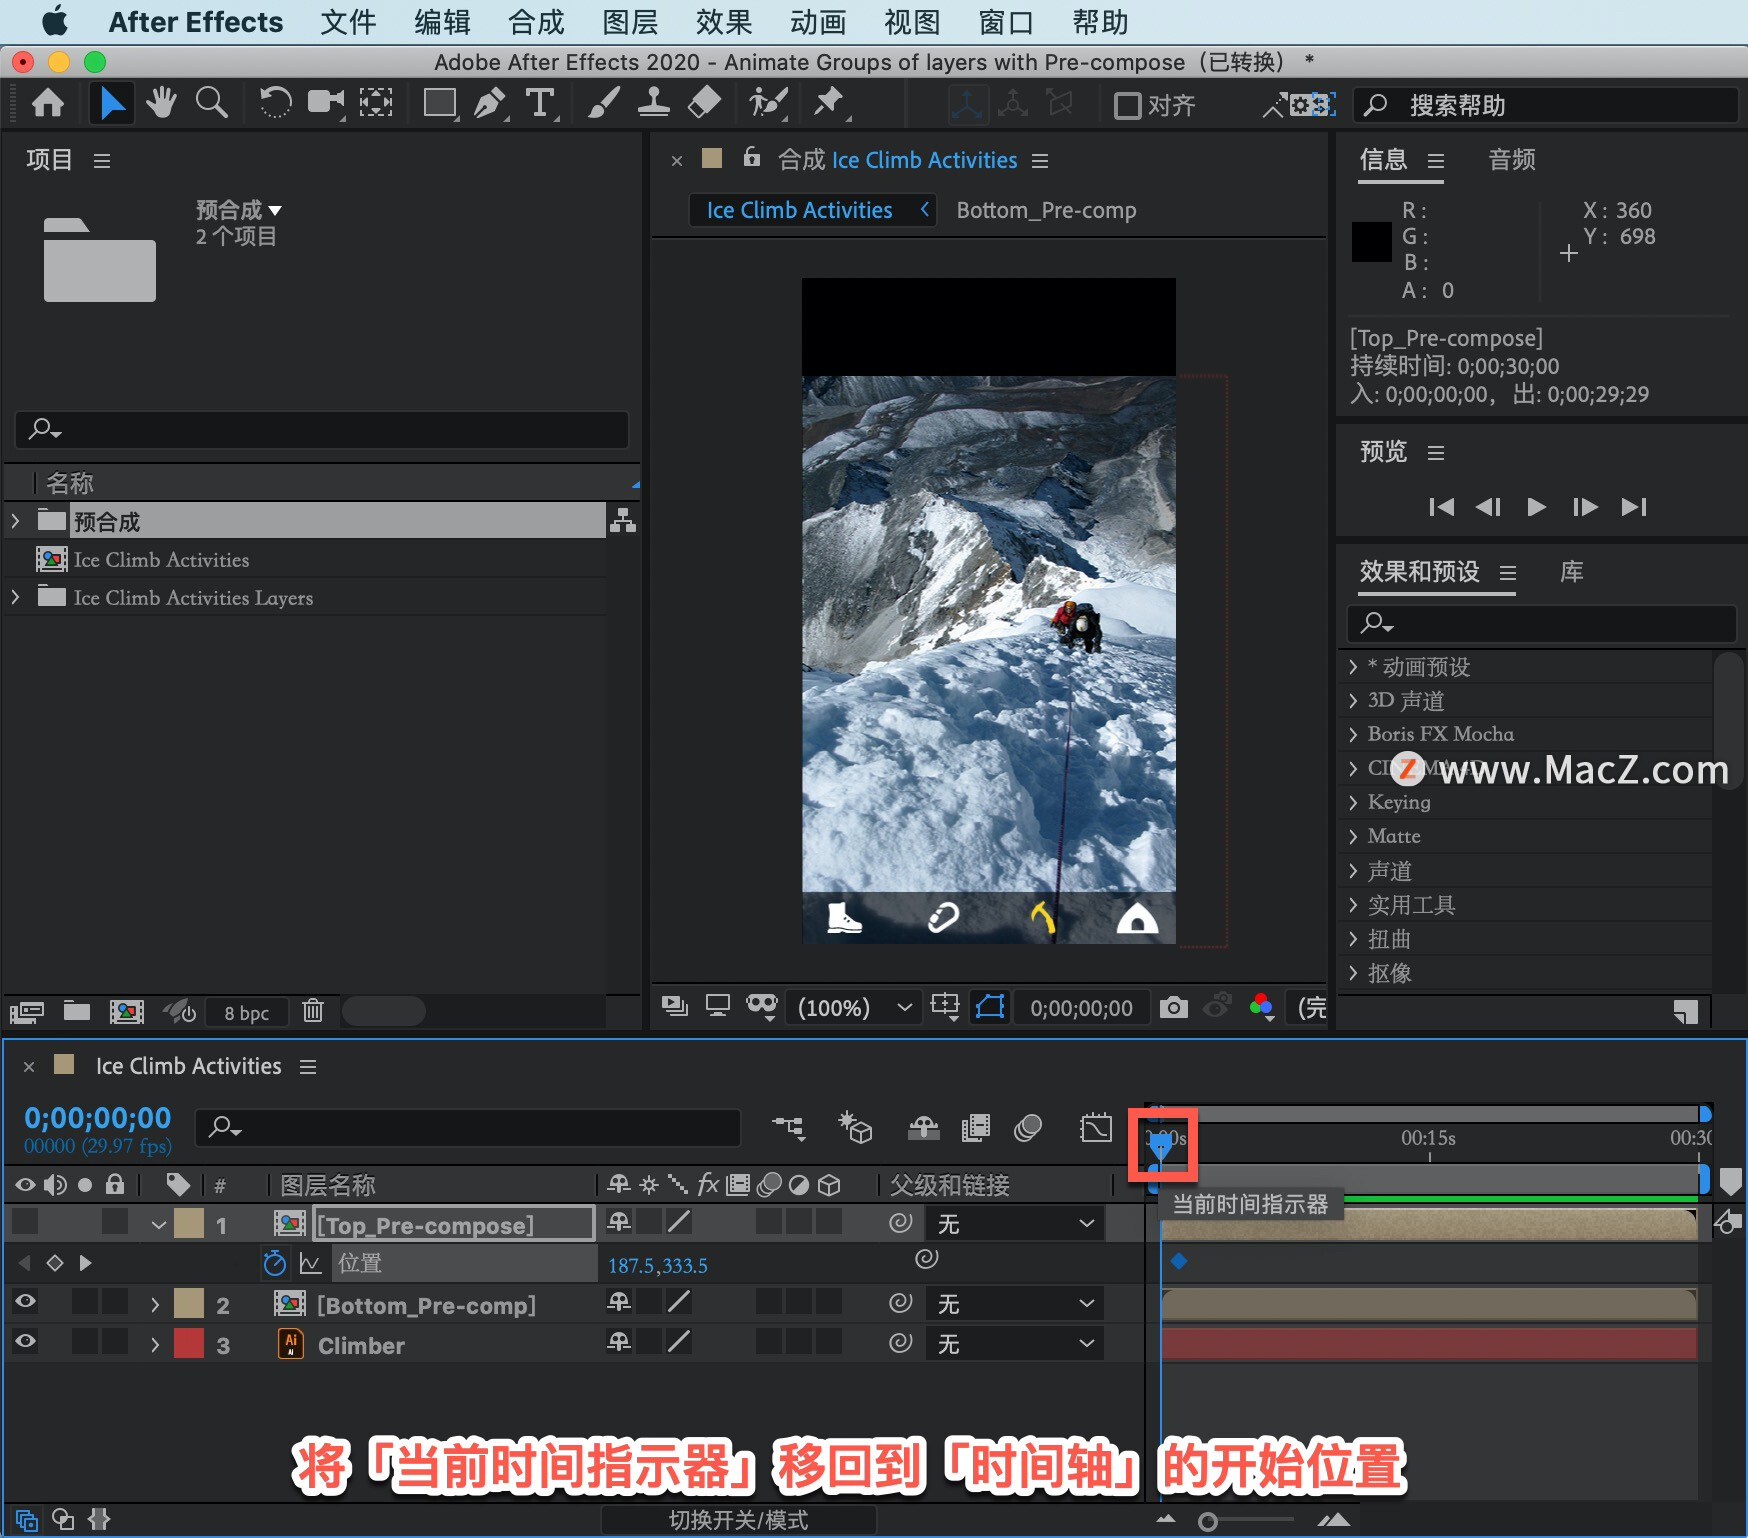 After Effects 教程「48」，如何在 After Effects 中对图层组进行动画绘制？